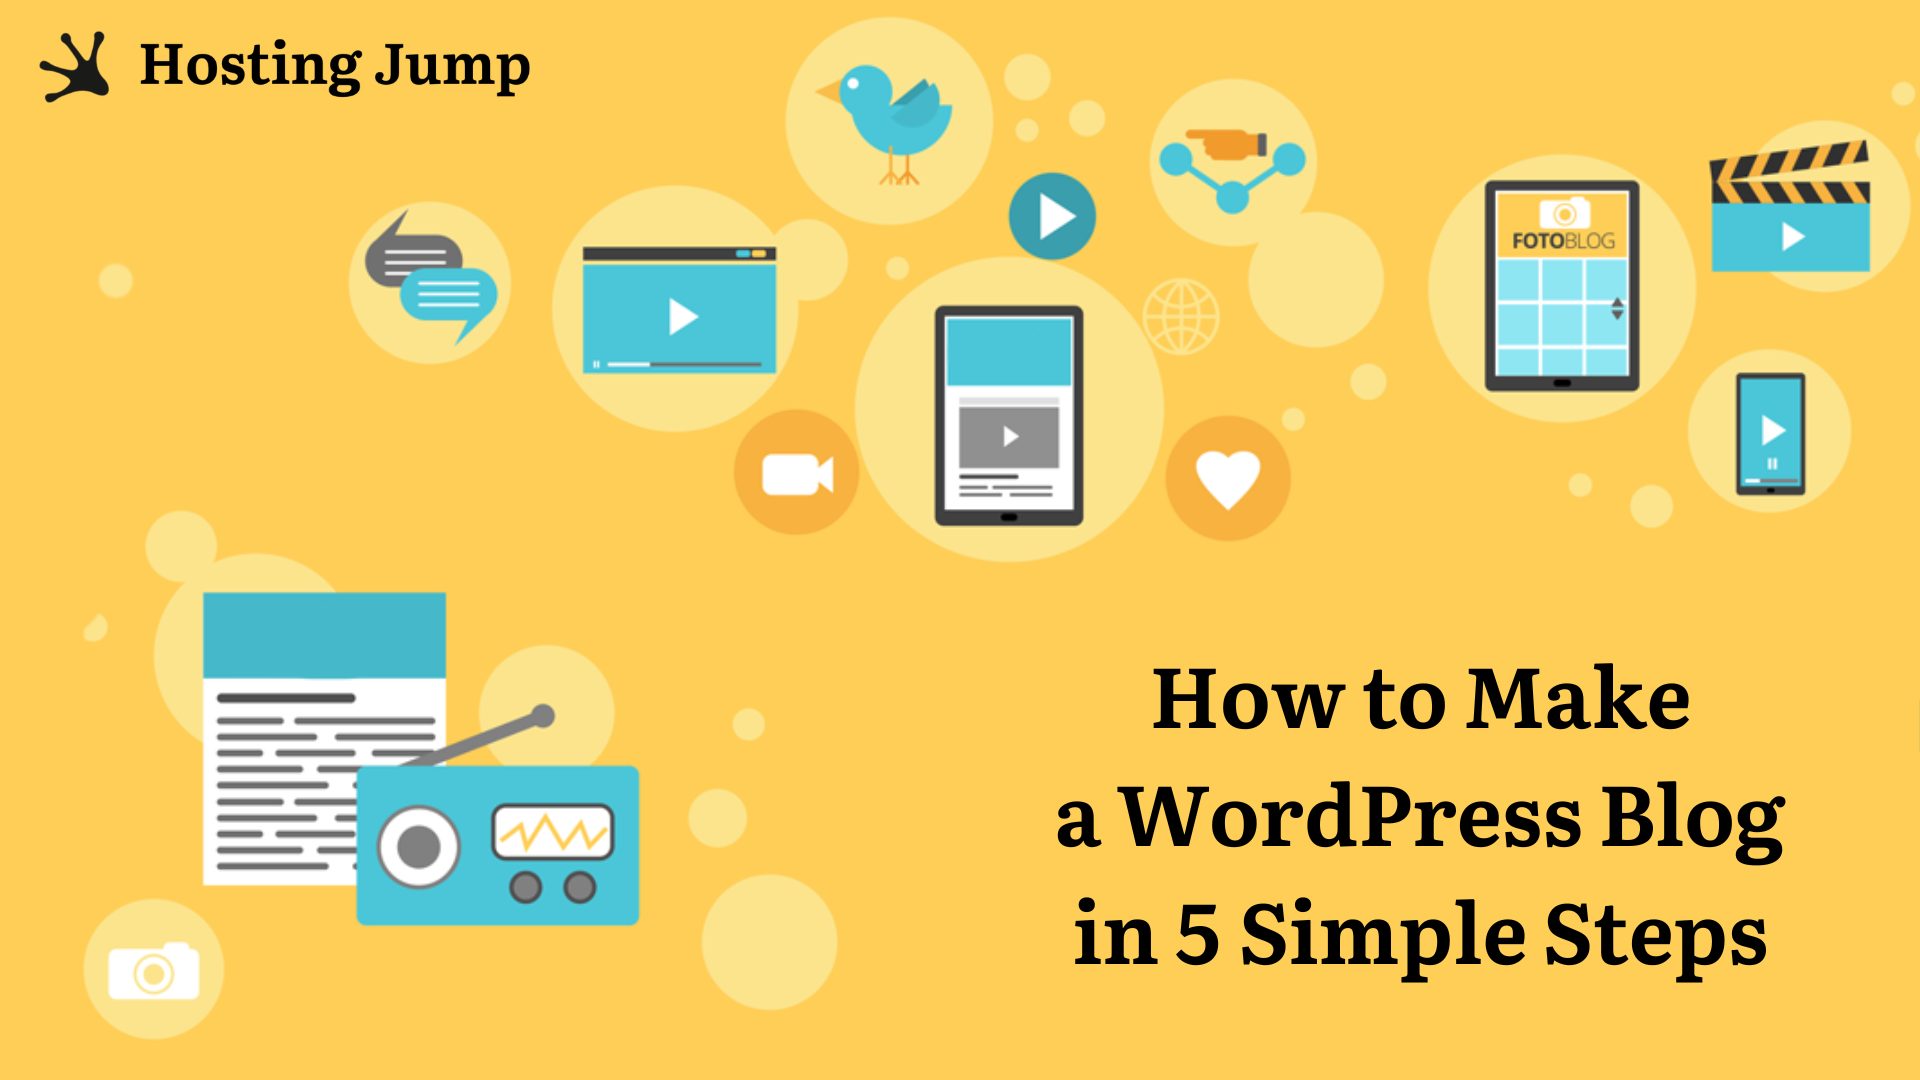 How to Make a WordPress Blog in 5 Simple Steps